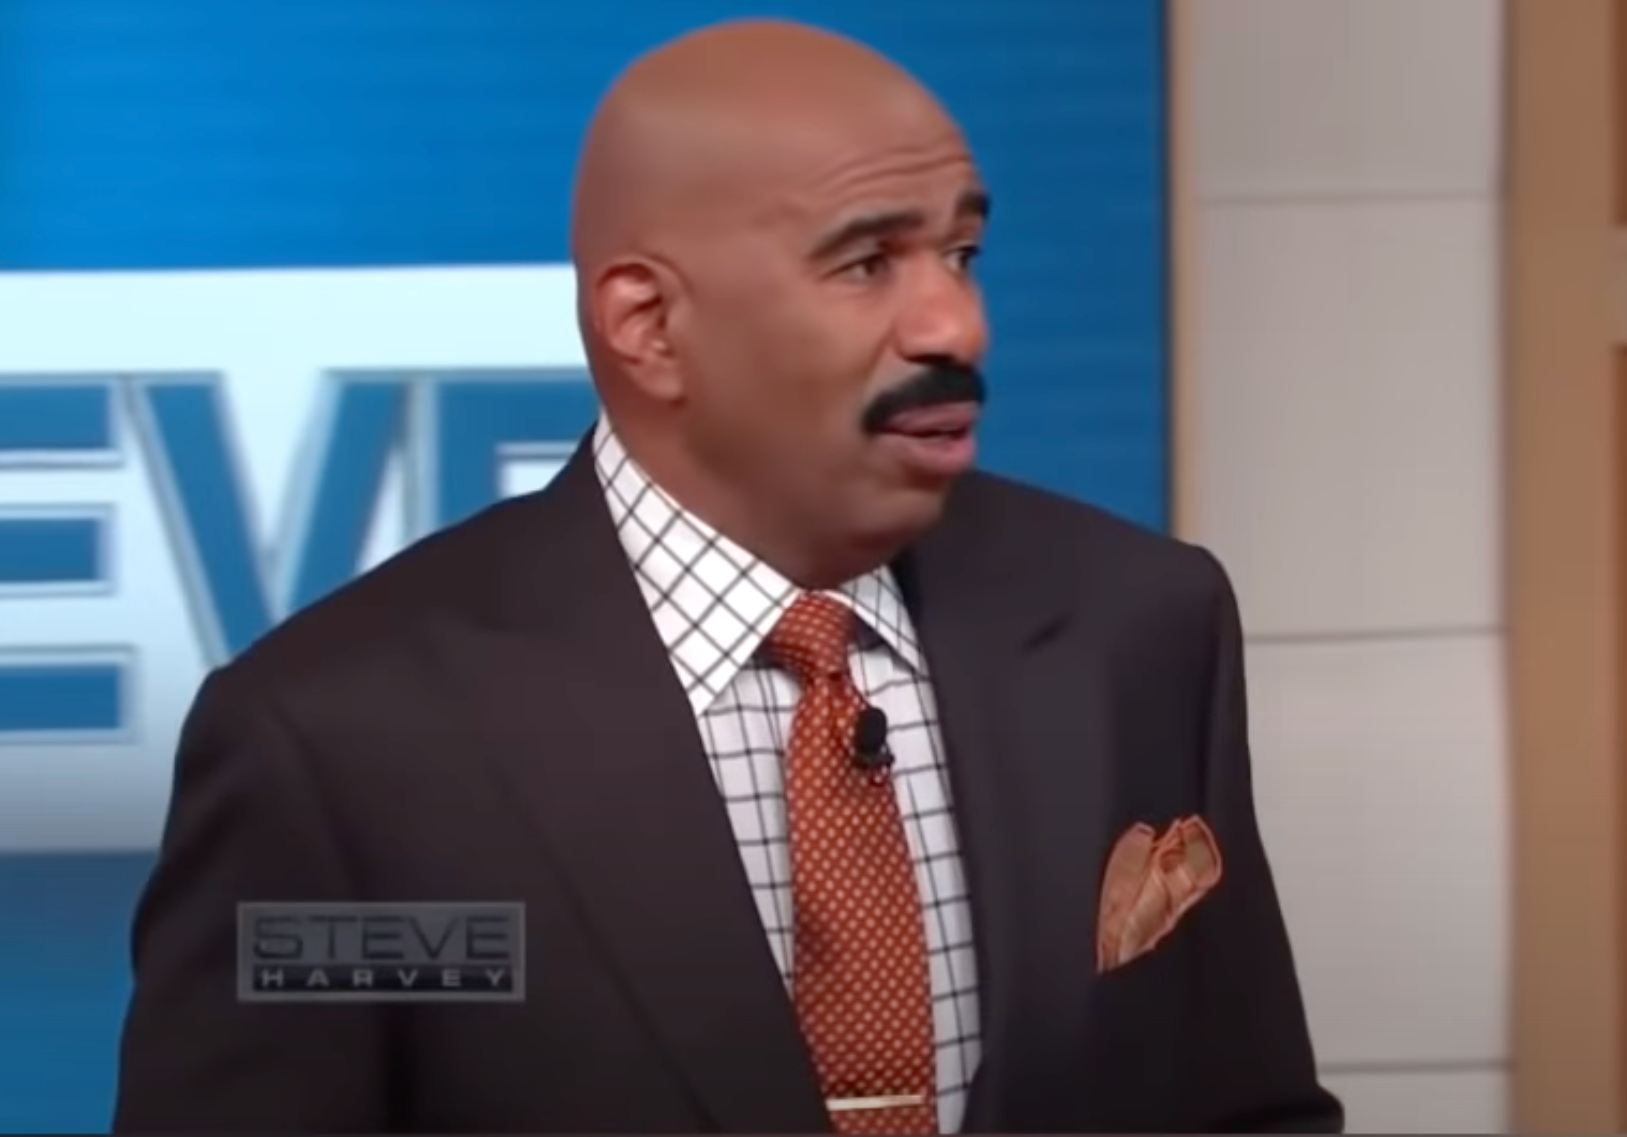 Relationships: New Study May Make Steve Harvey's Wife Uncomfortable